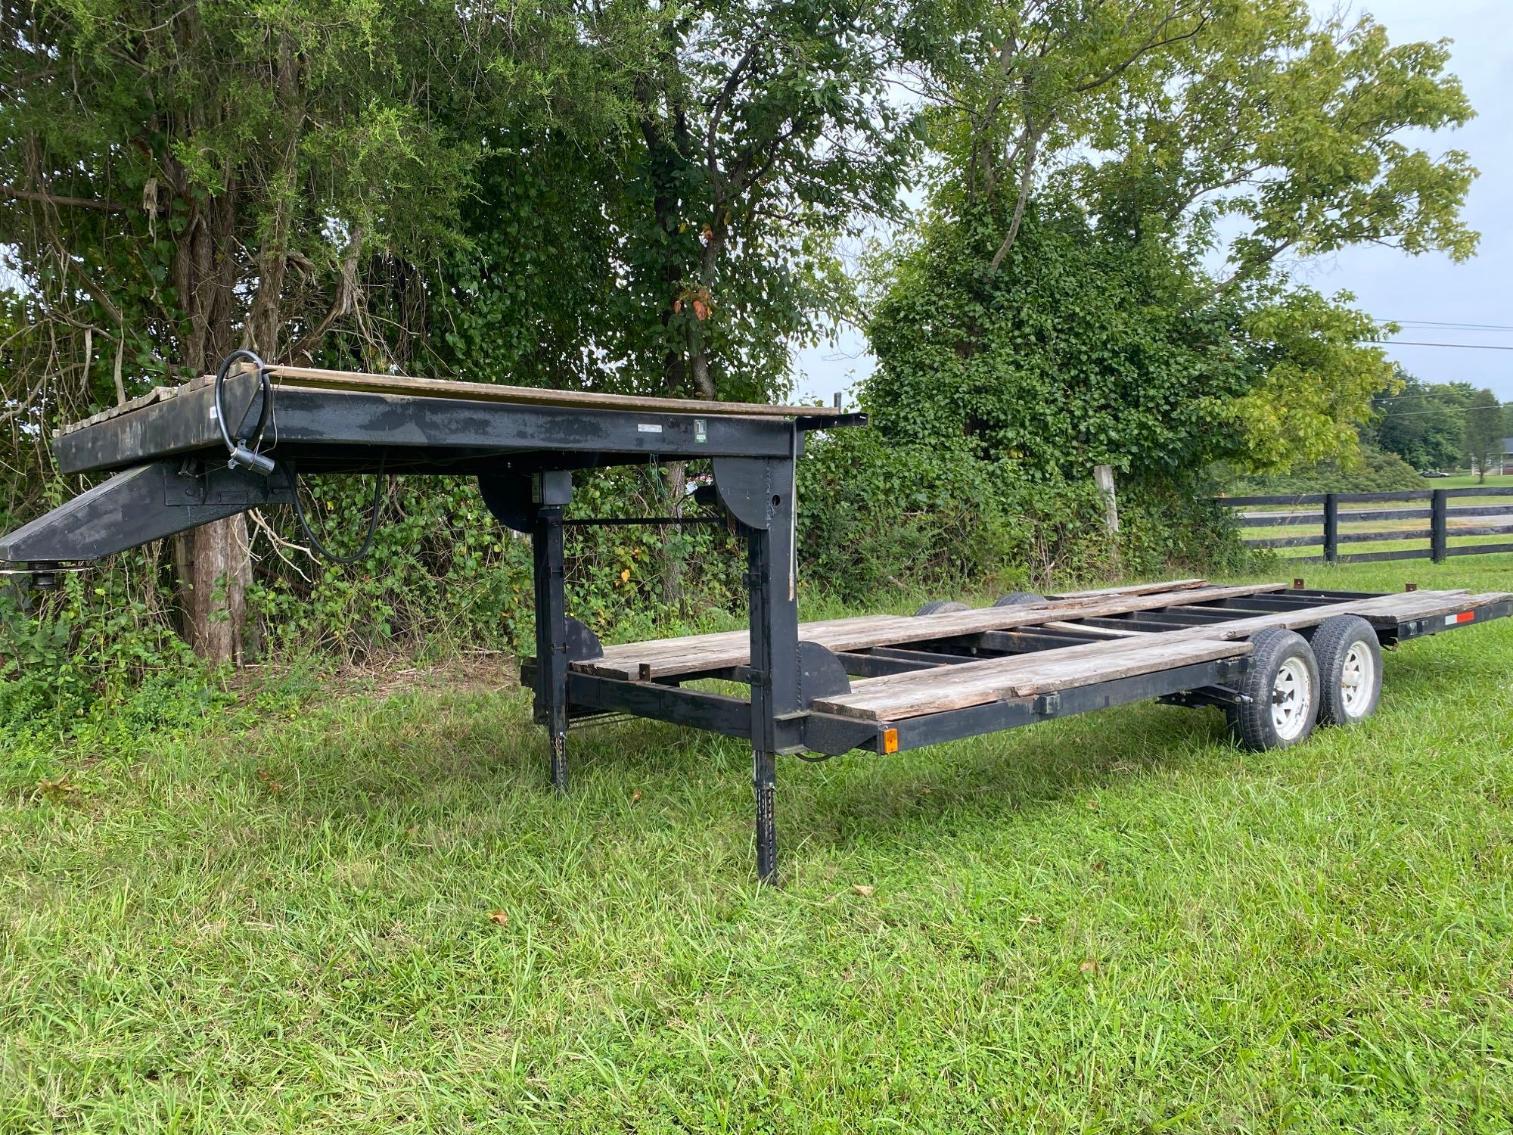 Image for 2017 Homemade 5th Wheel Utility Trailer (20'); dual axle, previously a camper, needs new deck